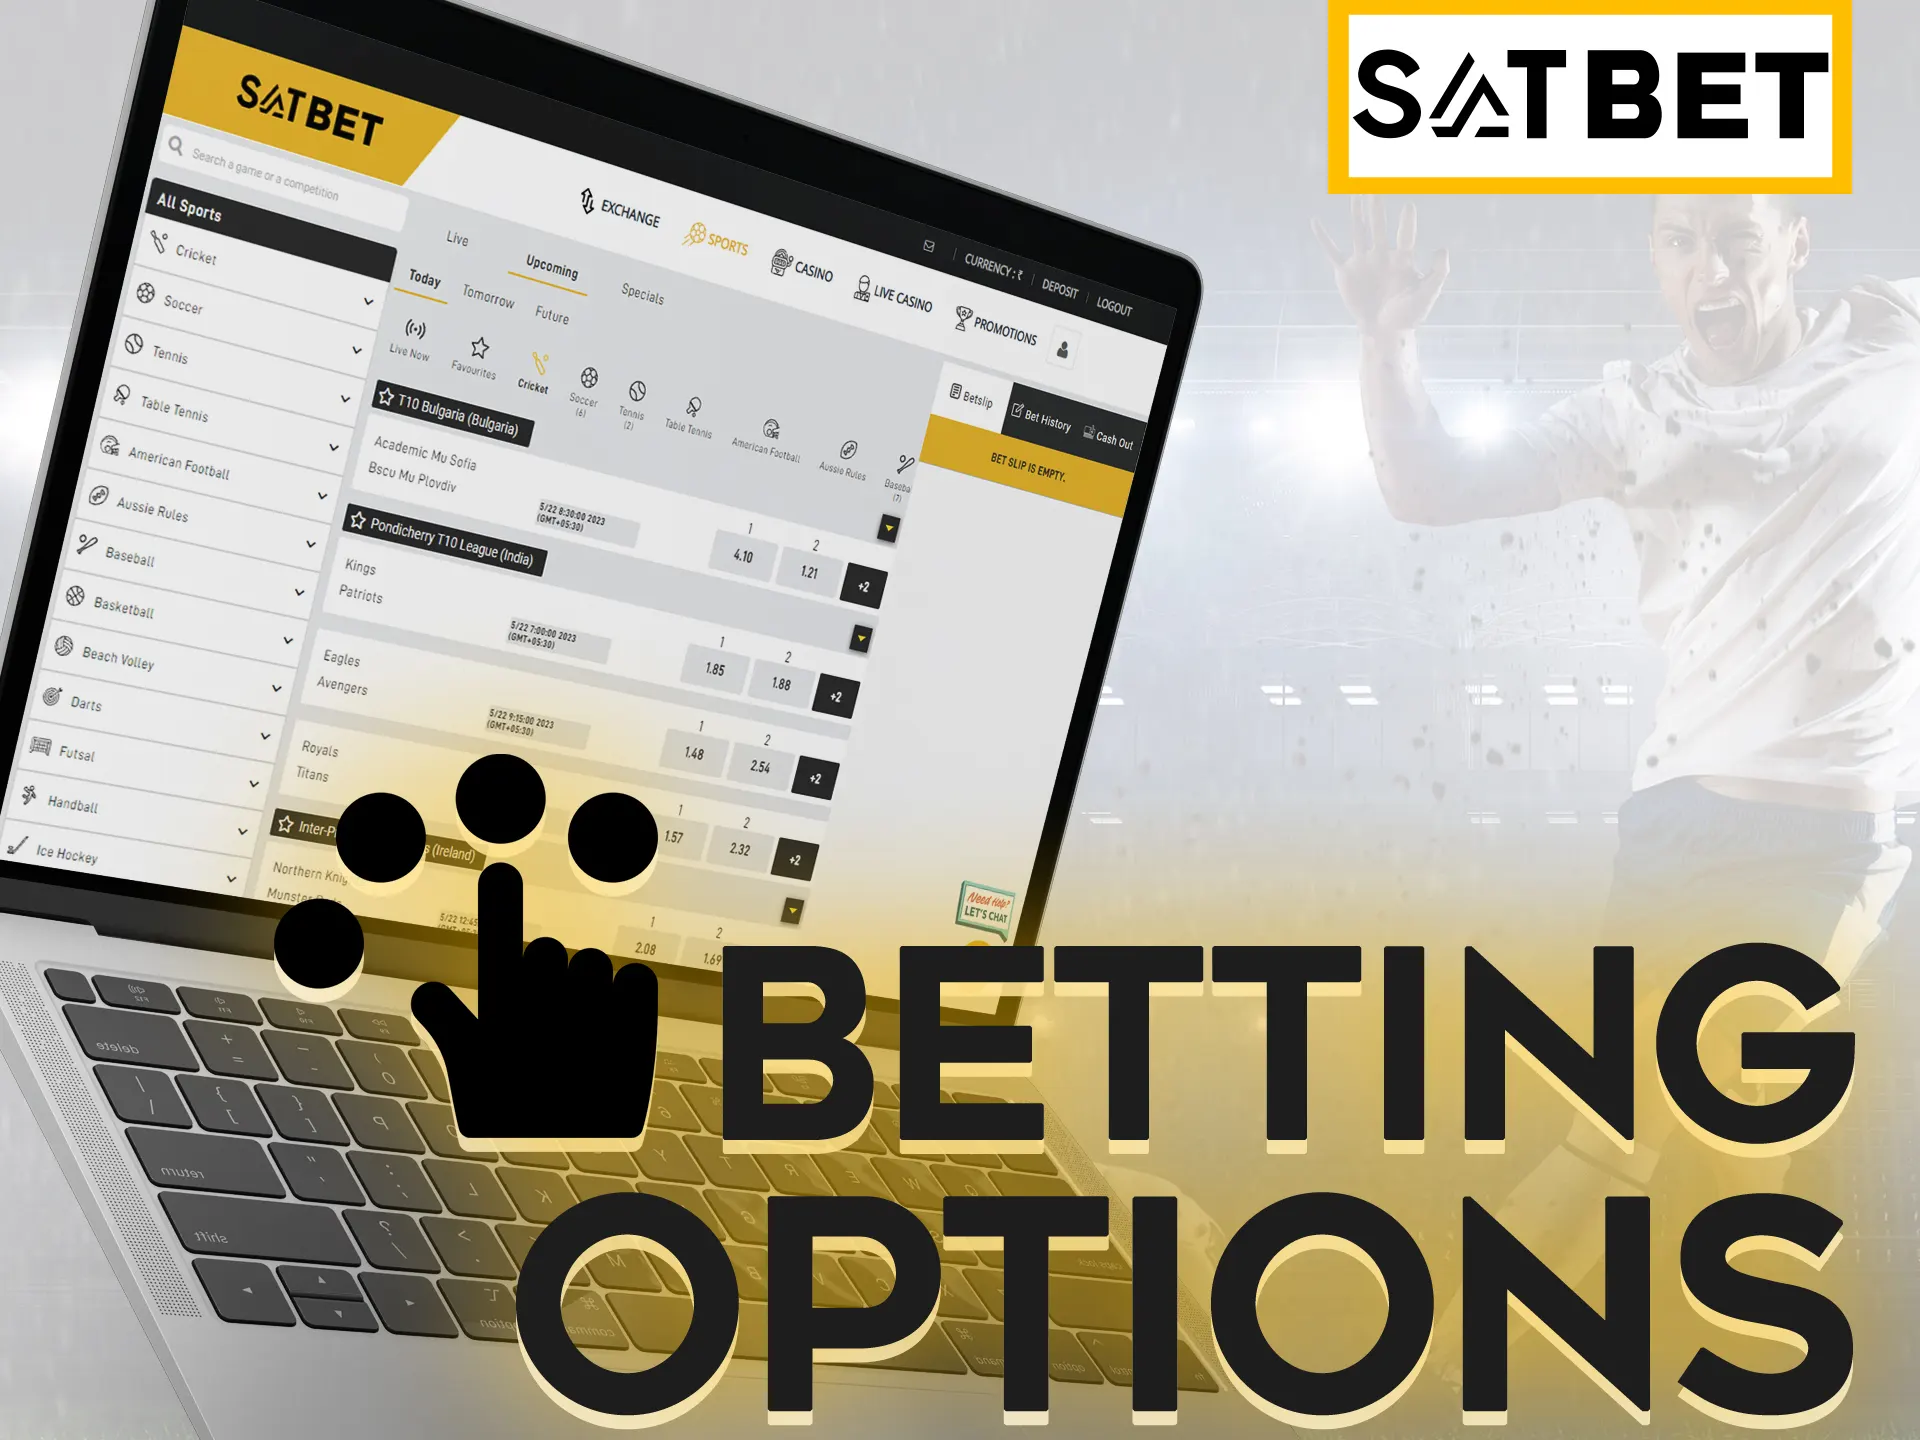 Make your own bet using different bet options at Satbet.